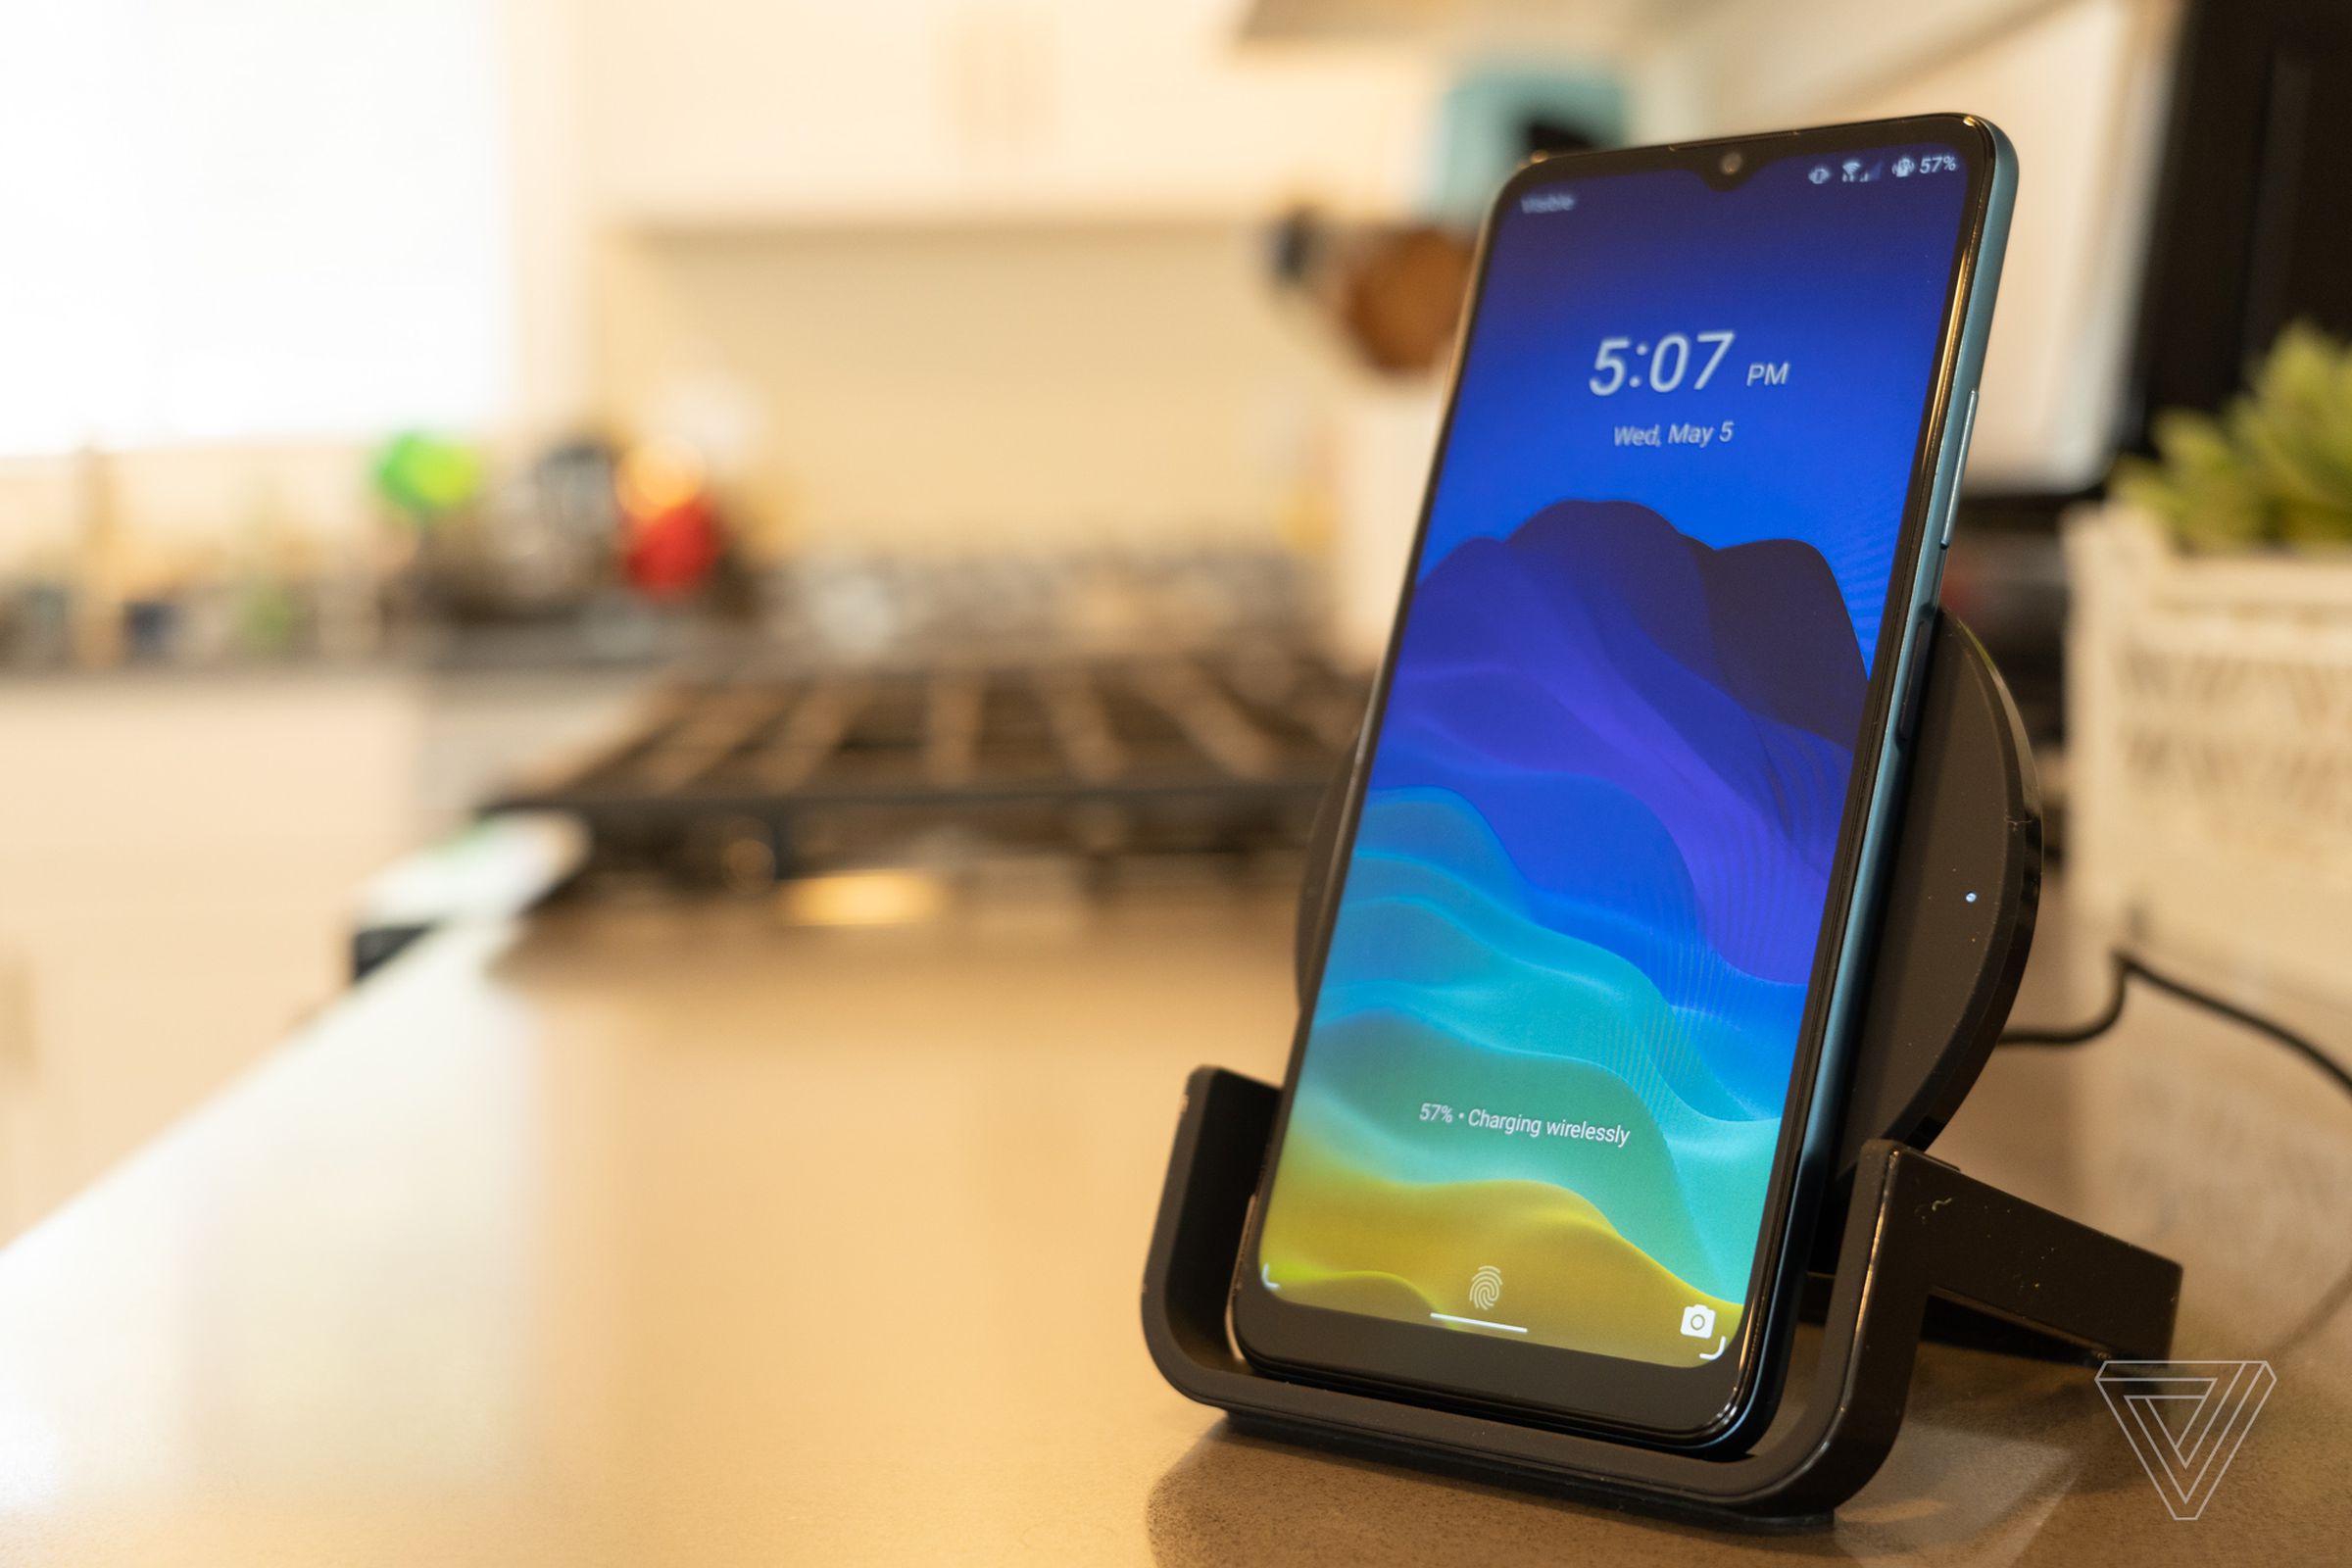 The Blade 11 Prime supports the Qi wireless charging standard at 5W.